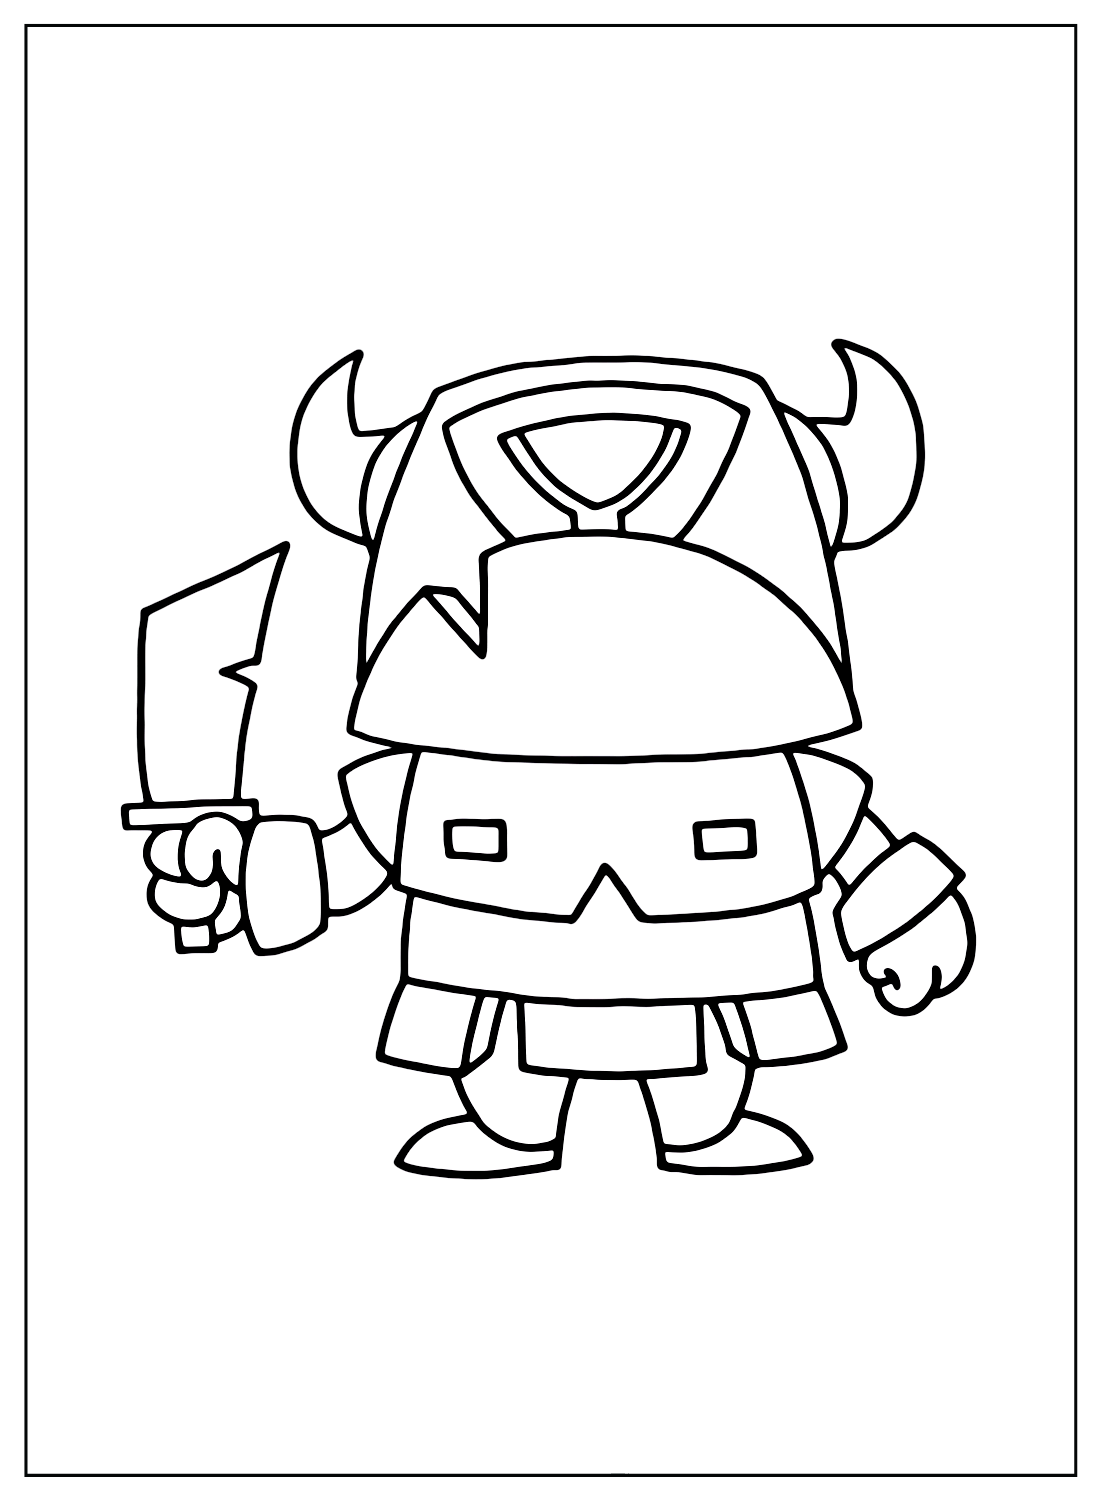 Chibi Pekka Coloring Pages from Clash of Clans